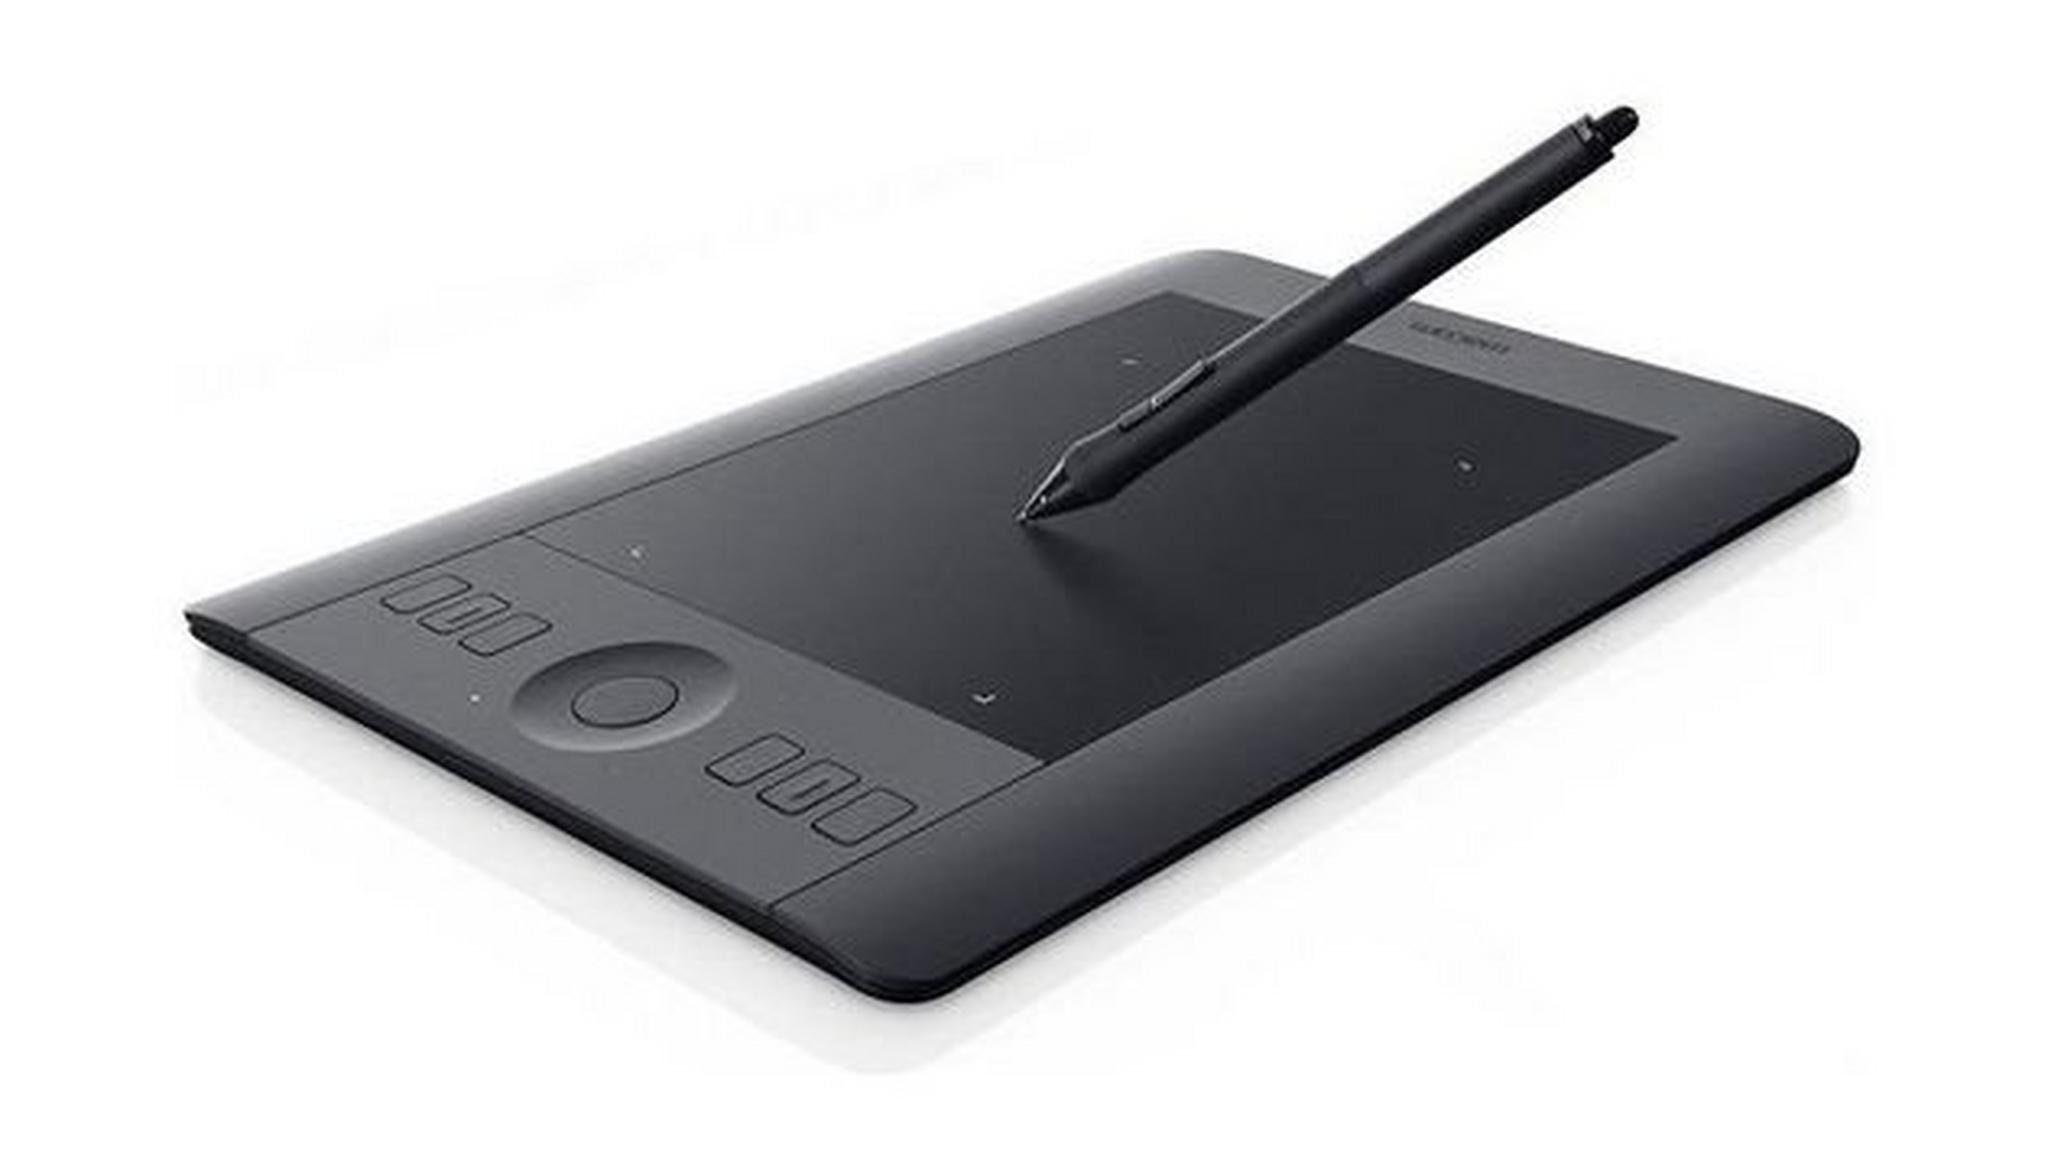 WACOM Intuos 6.1-inch - Wi-Fi Only Tablet - Black